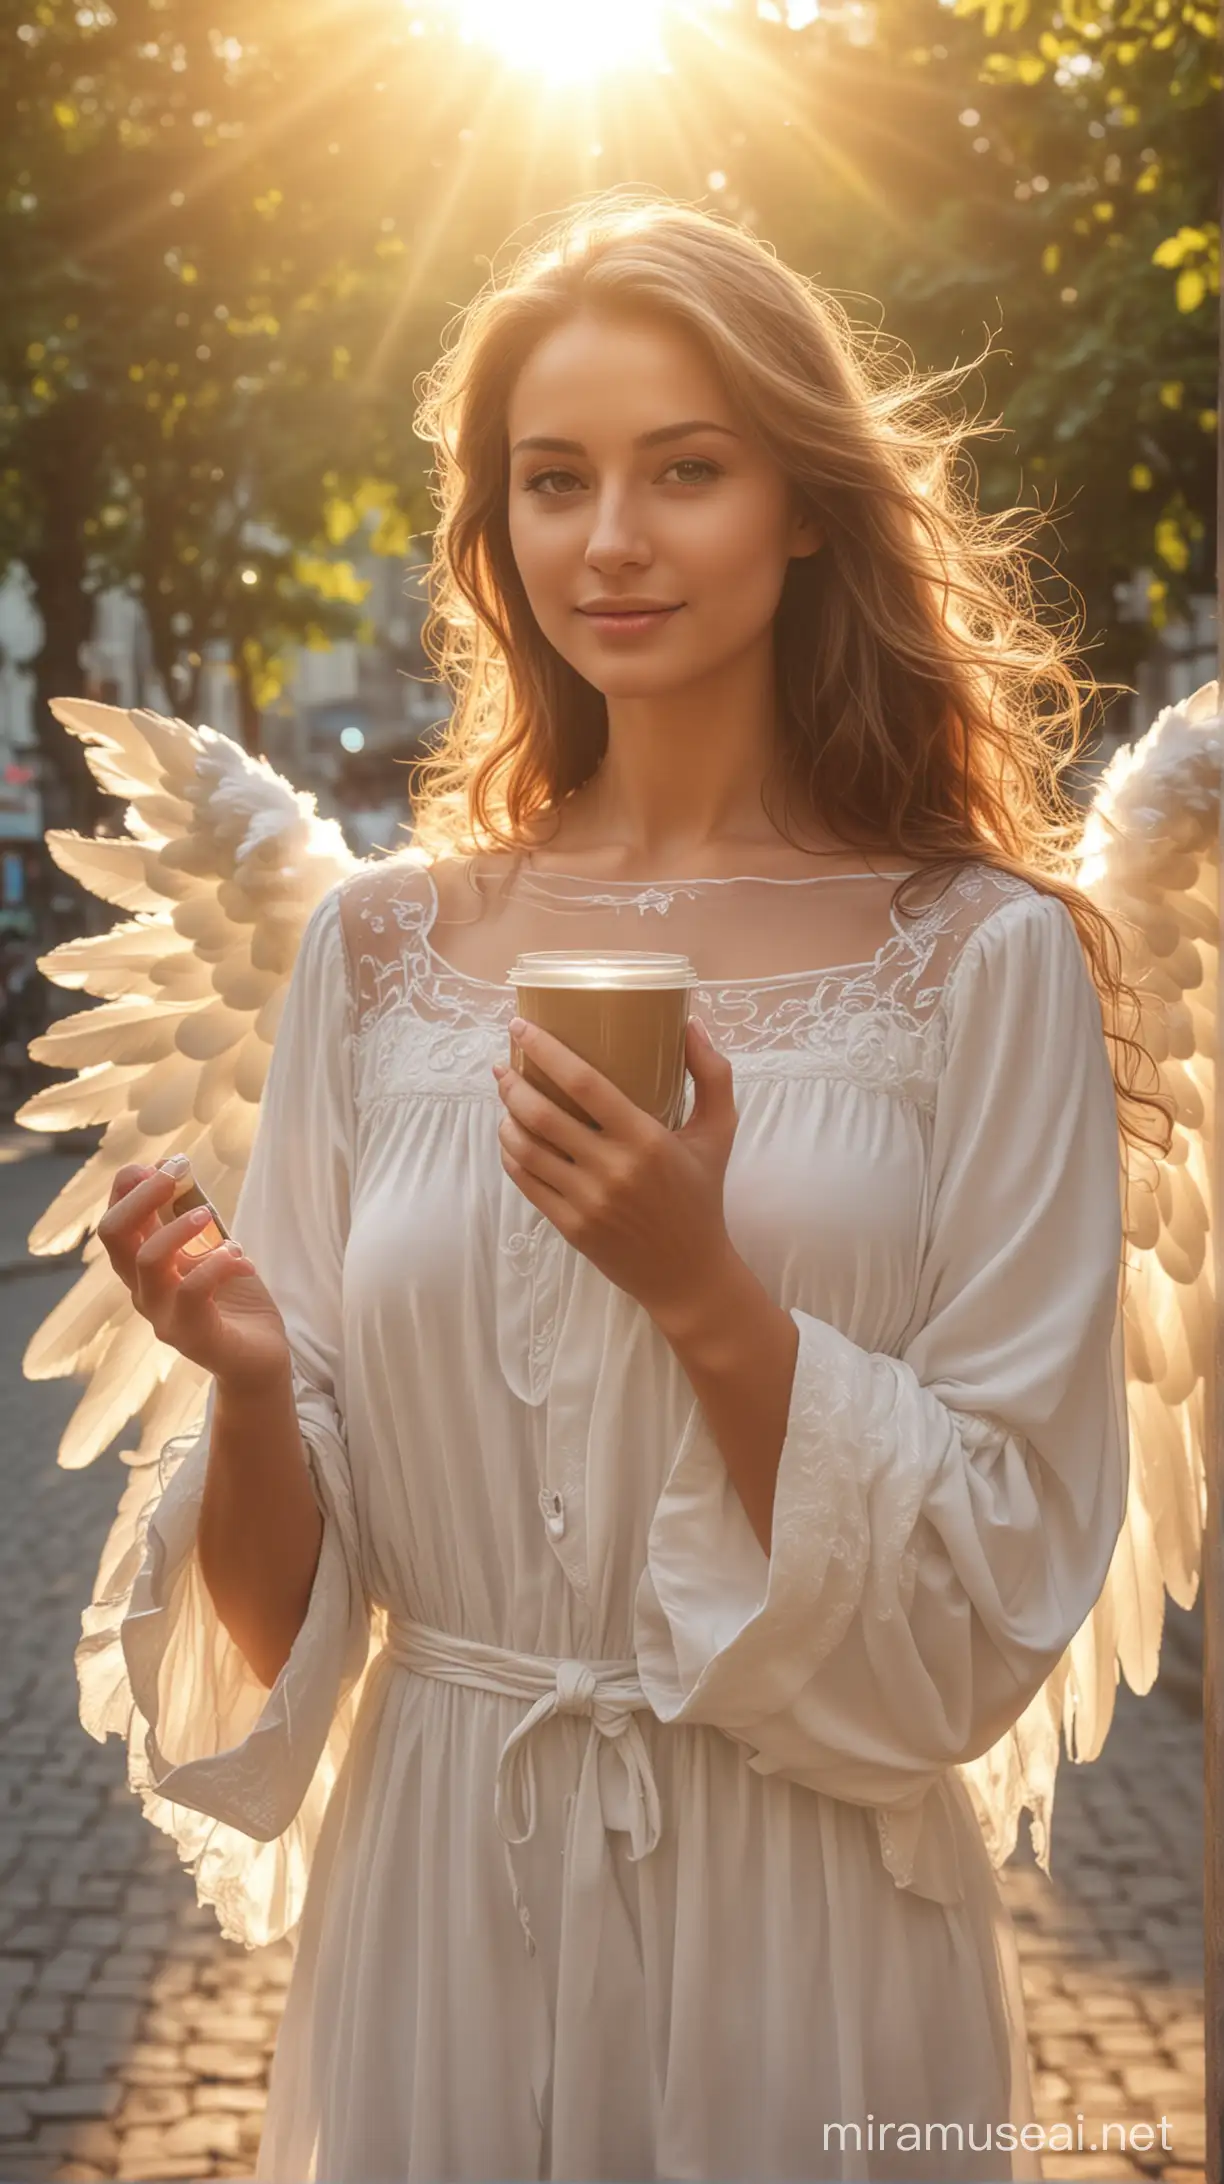 Beautiful Angel women and holding coffee on hand, natural background, sun light effect, 4k, HDR, morning time weather